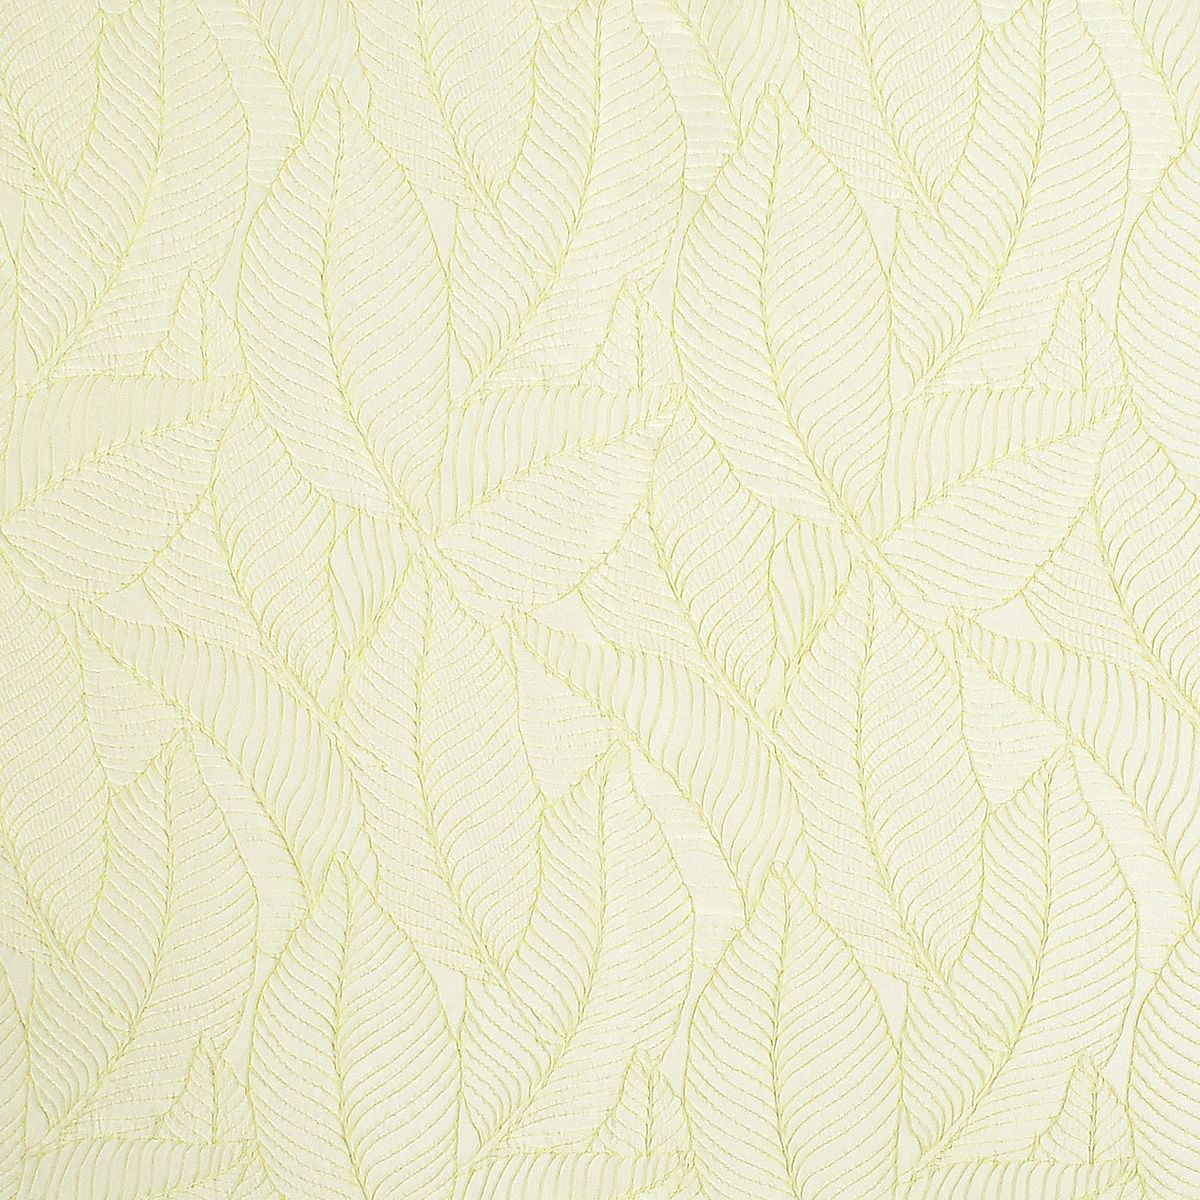 Sagamore Hill fabric in pear color - pattern number S7 0001DRYL - by Scalamandre in the Old World Weavers collection